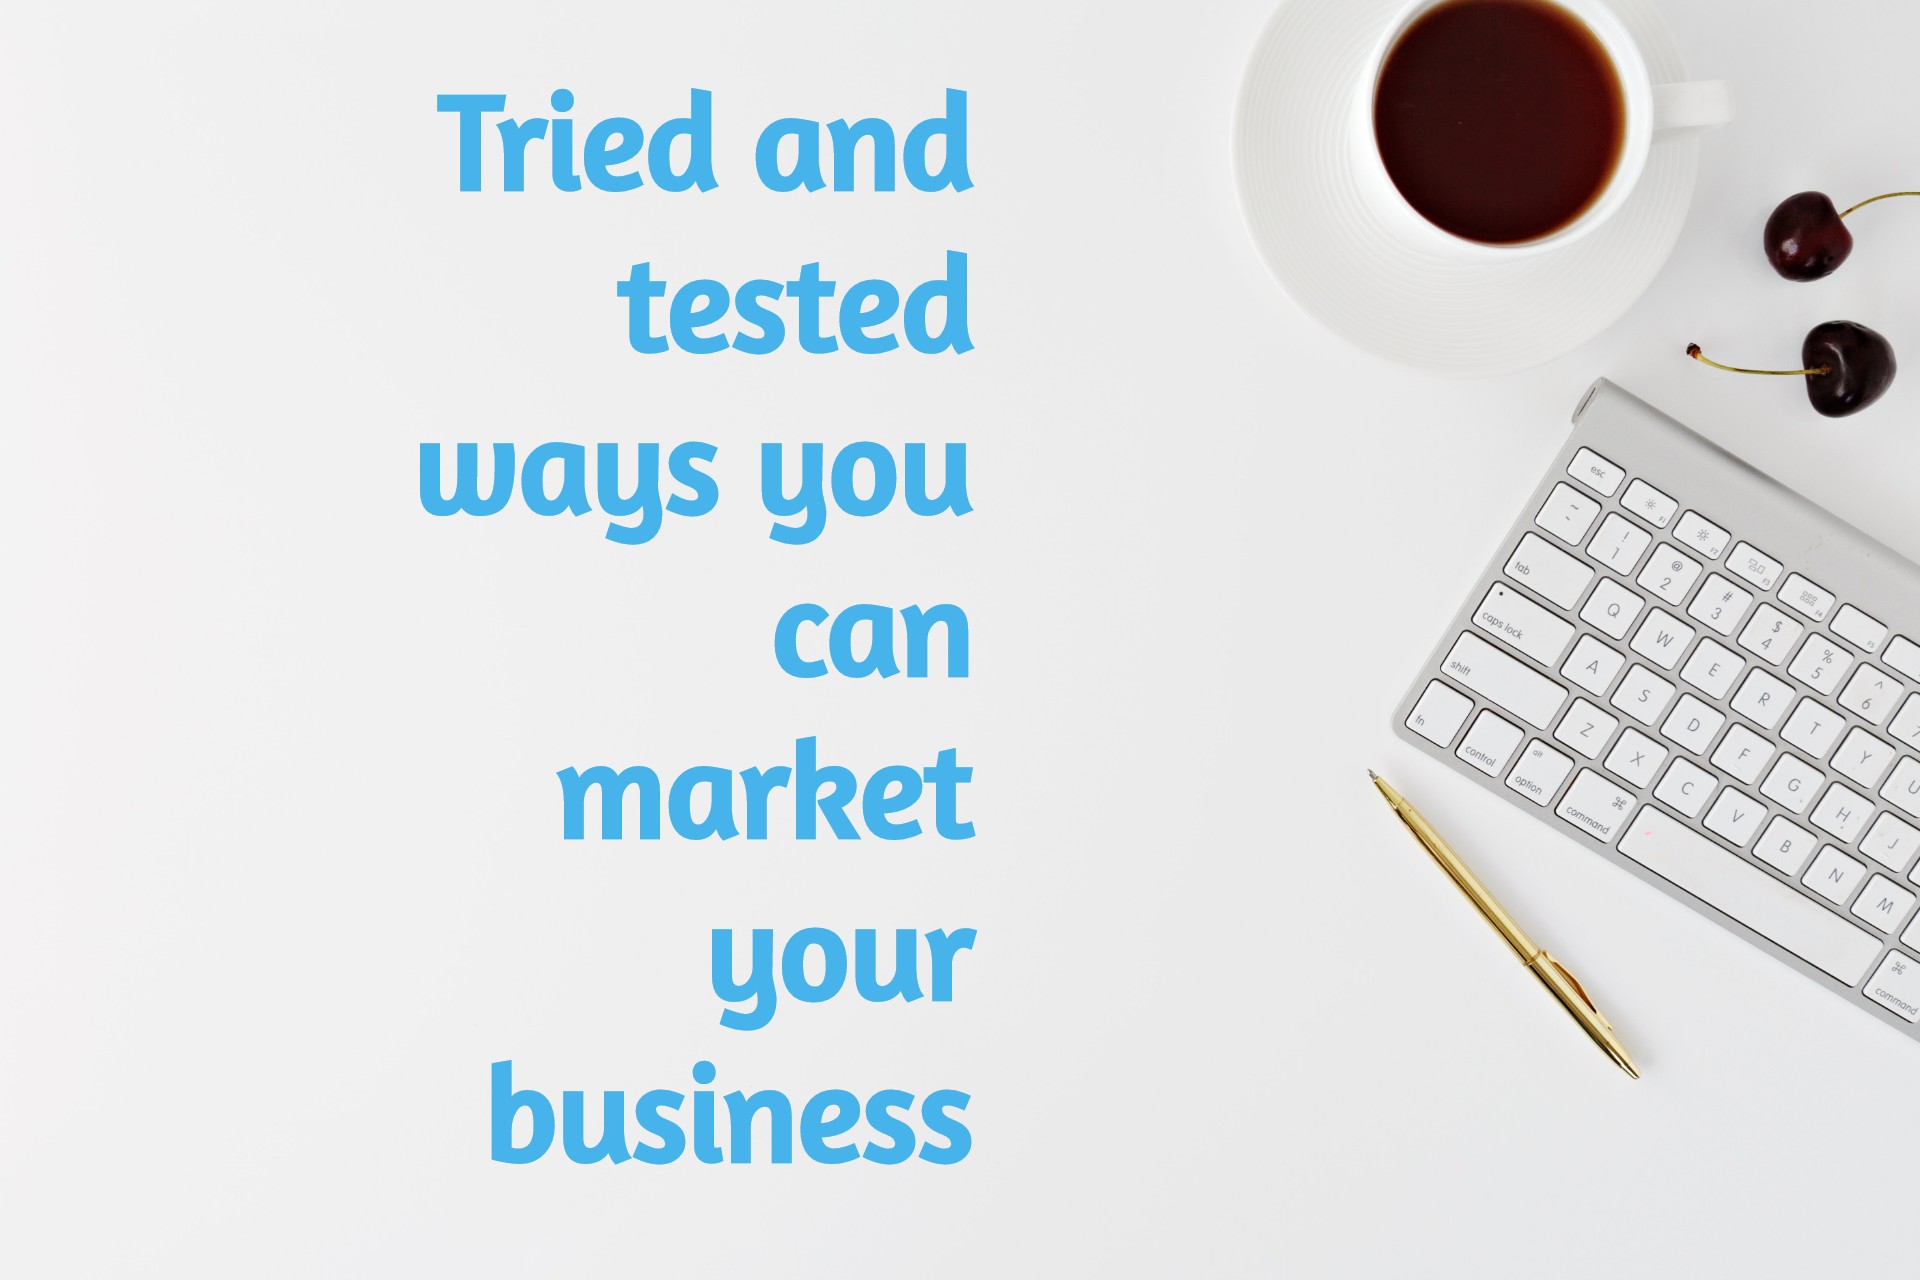 Tried and tested ways you can market your business